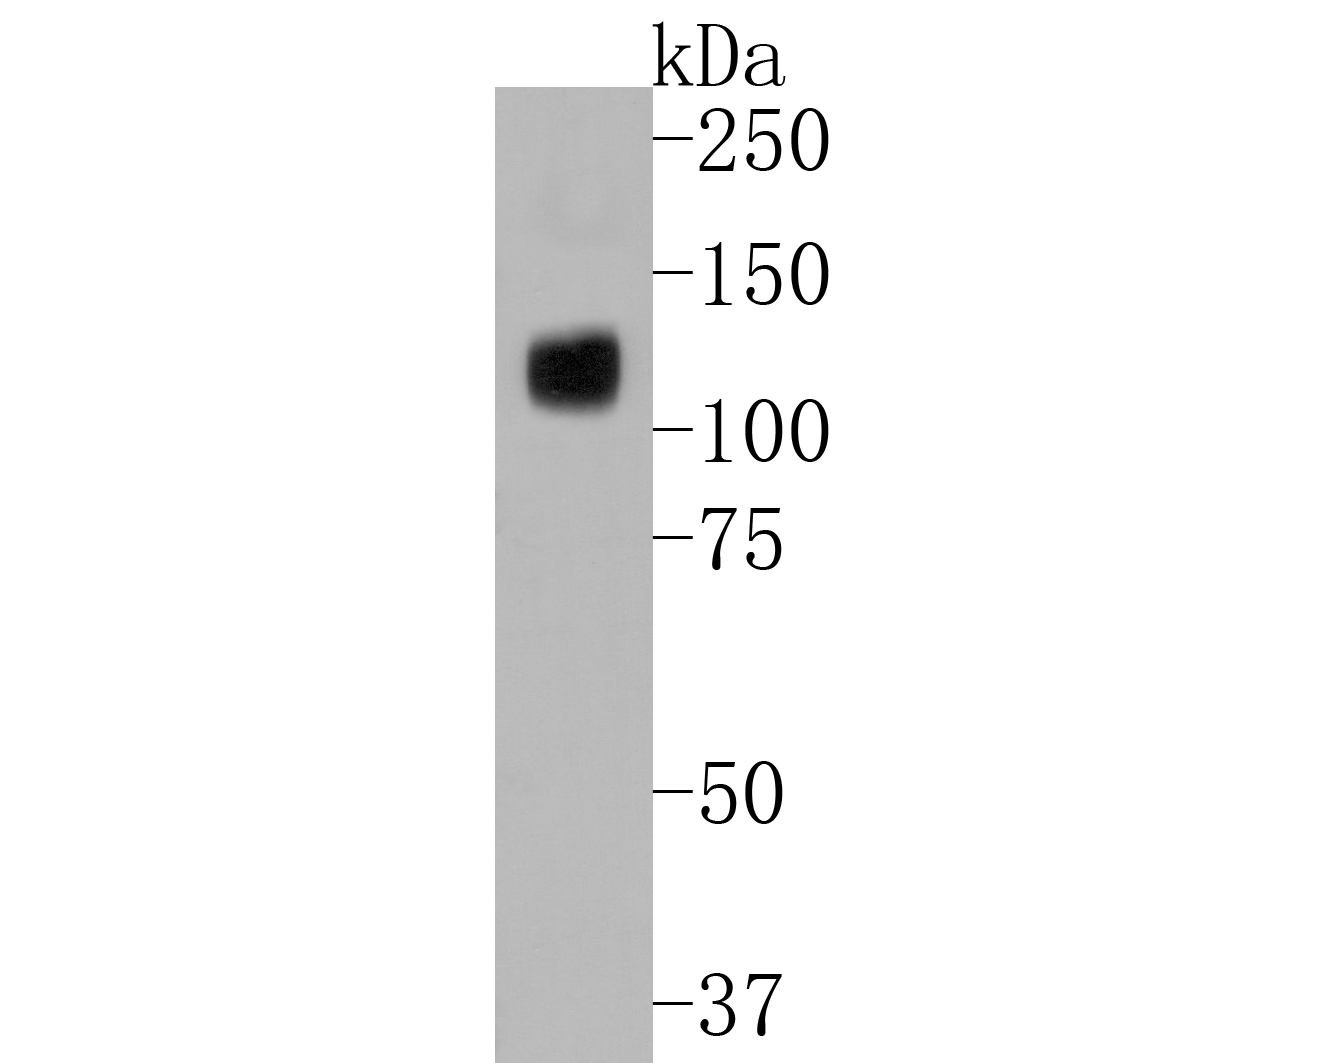 Western blot analysis of ATG9A on HepG2 cell lysates. Proteins were transferred to a PVDF membrane and blocked with 5% BSA in PBS for 1 hour at room temperature. The primary antibody (ET1610-71, 1/500) was used in 5% BSA at room temperature for 2 hours. Goat Anti-Rabbit IgG - HRP Secondary Antibody (HA1001) at 1:5,000 dilution was used for 1 hour at room temperature.